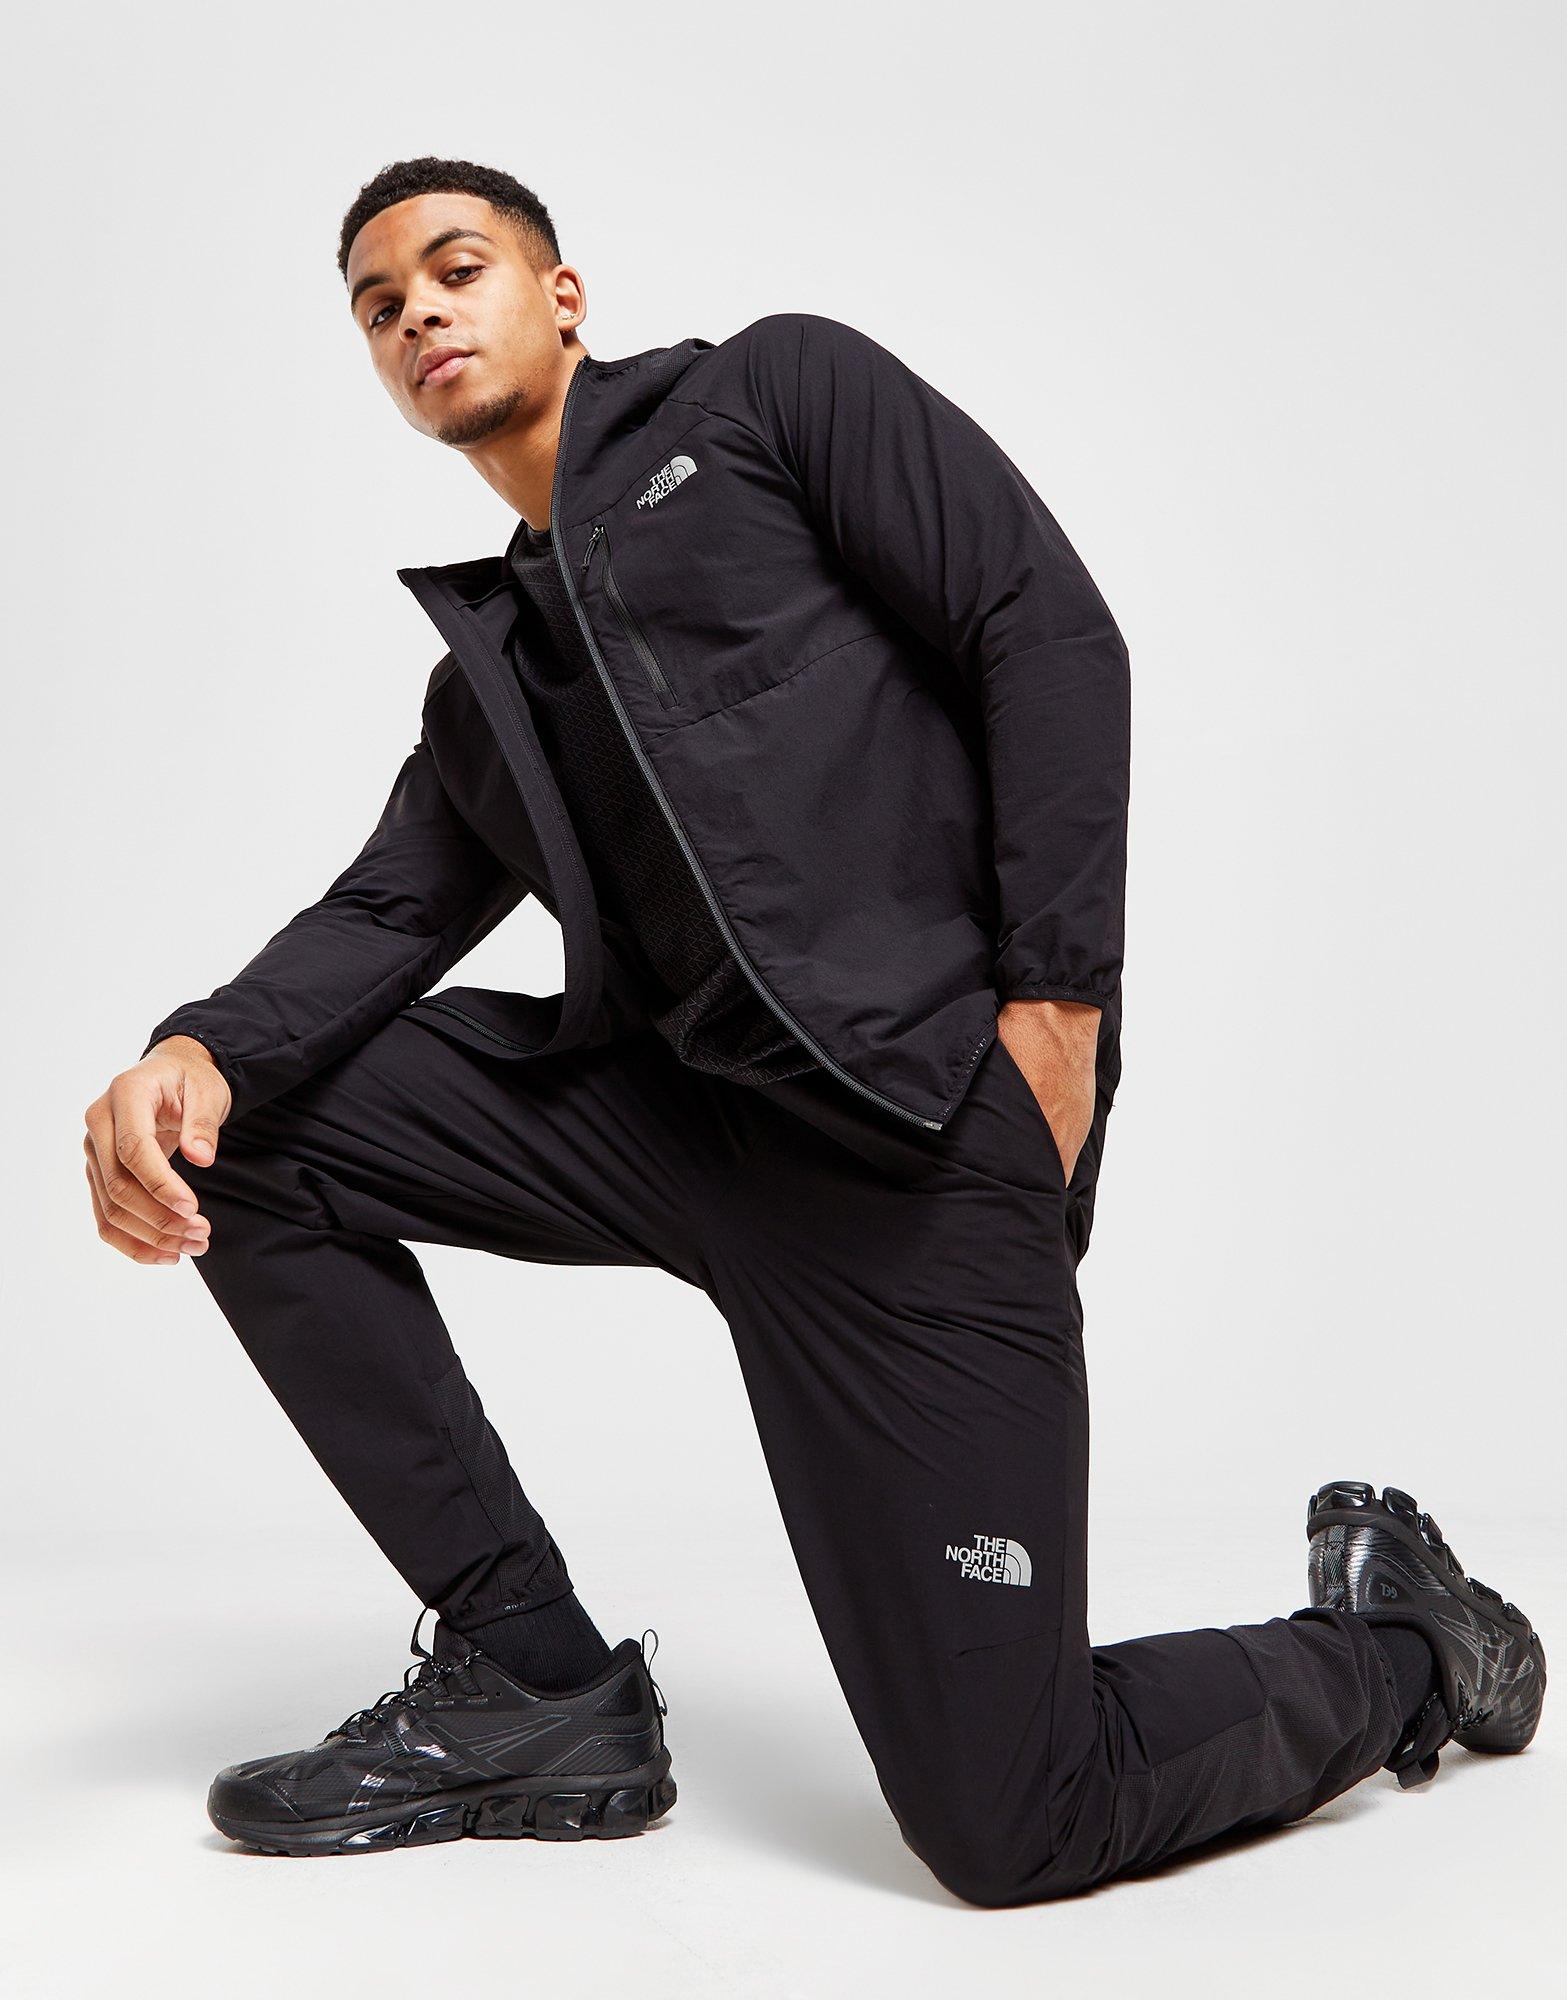 Ellesse Relaxed Sweatshirt & Tracksuit Bottoms Co-Ord